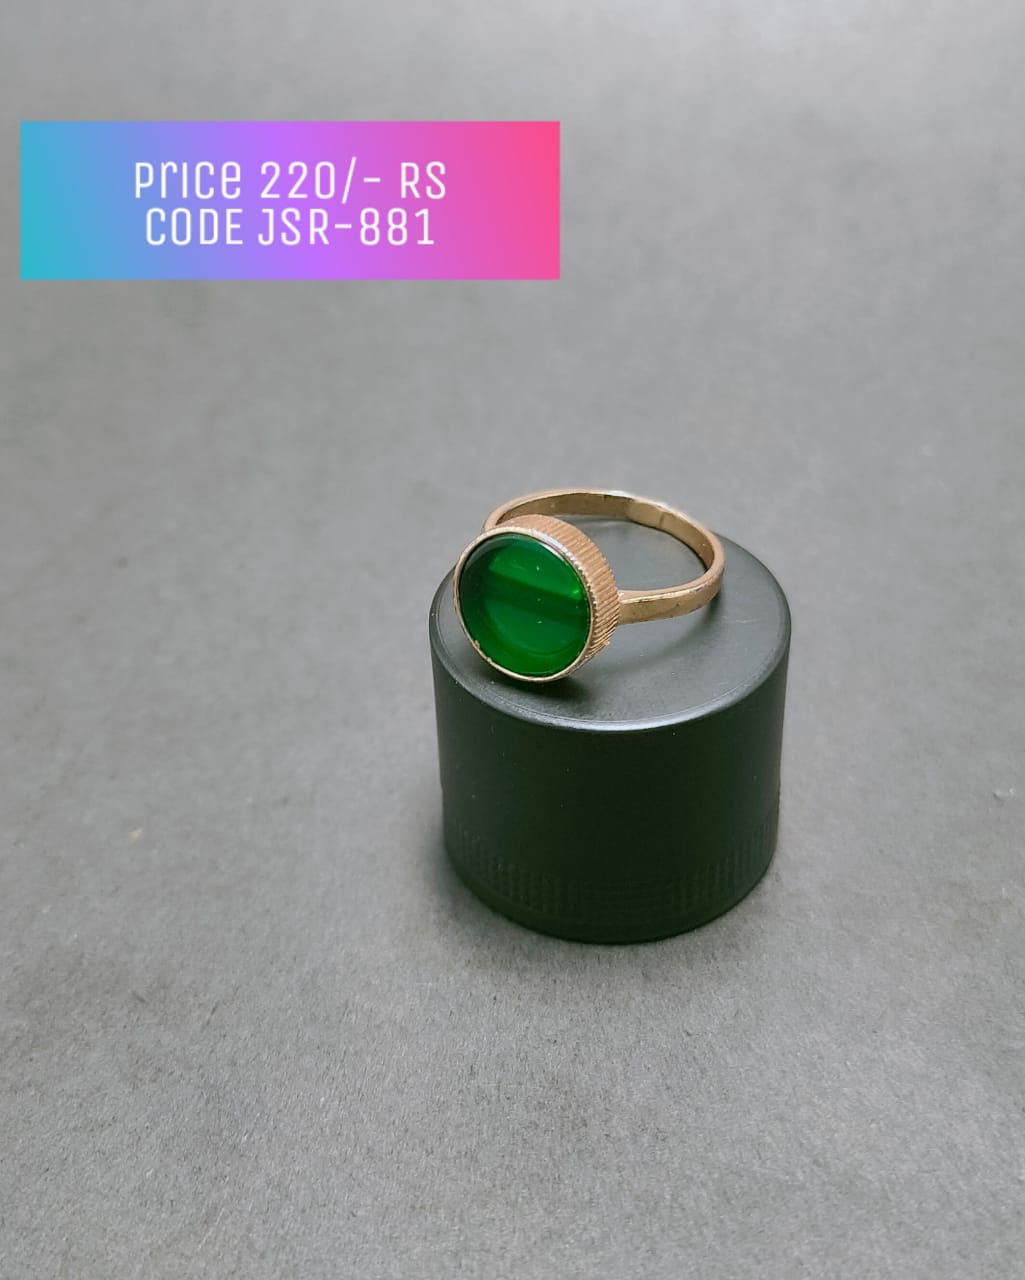 Buy Emerald Men's Ring in 925 Sterling Silver, Wedding Band, Gift for Him,  Statement Ring, Stylish Ring, Green Stone Ring for Men. Online in India -  Etsy